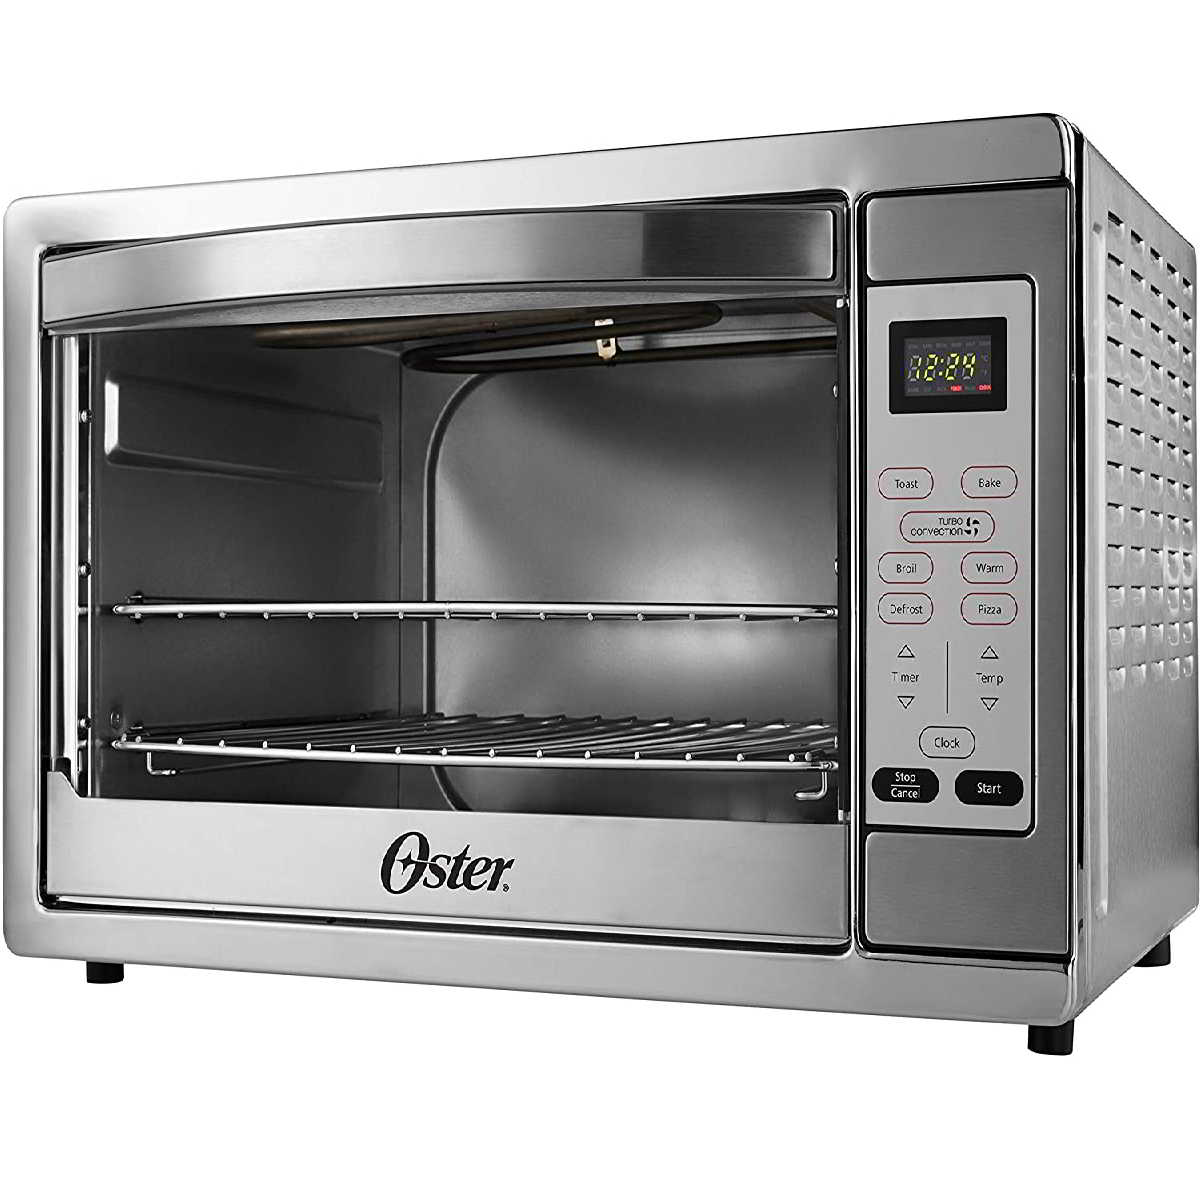 Best countertop oven for baking cakes